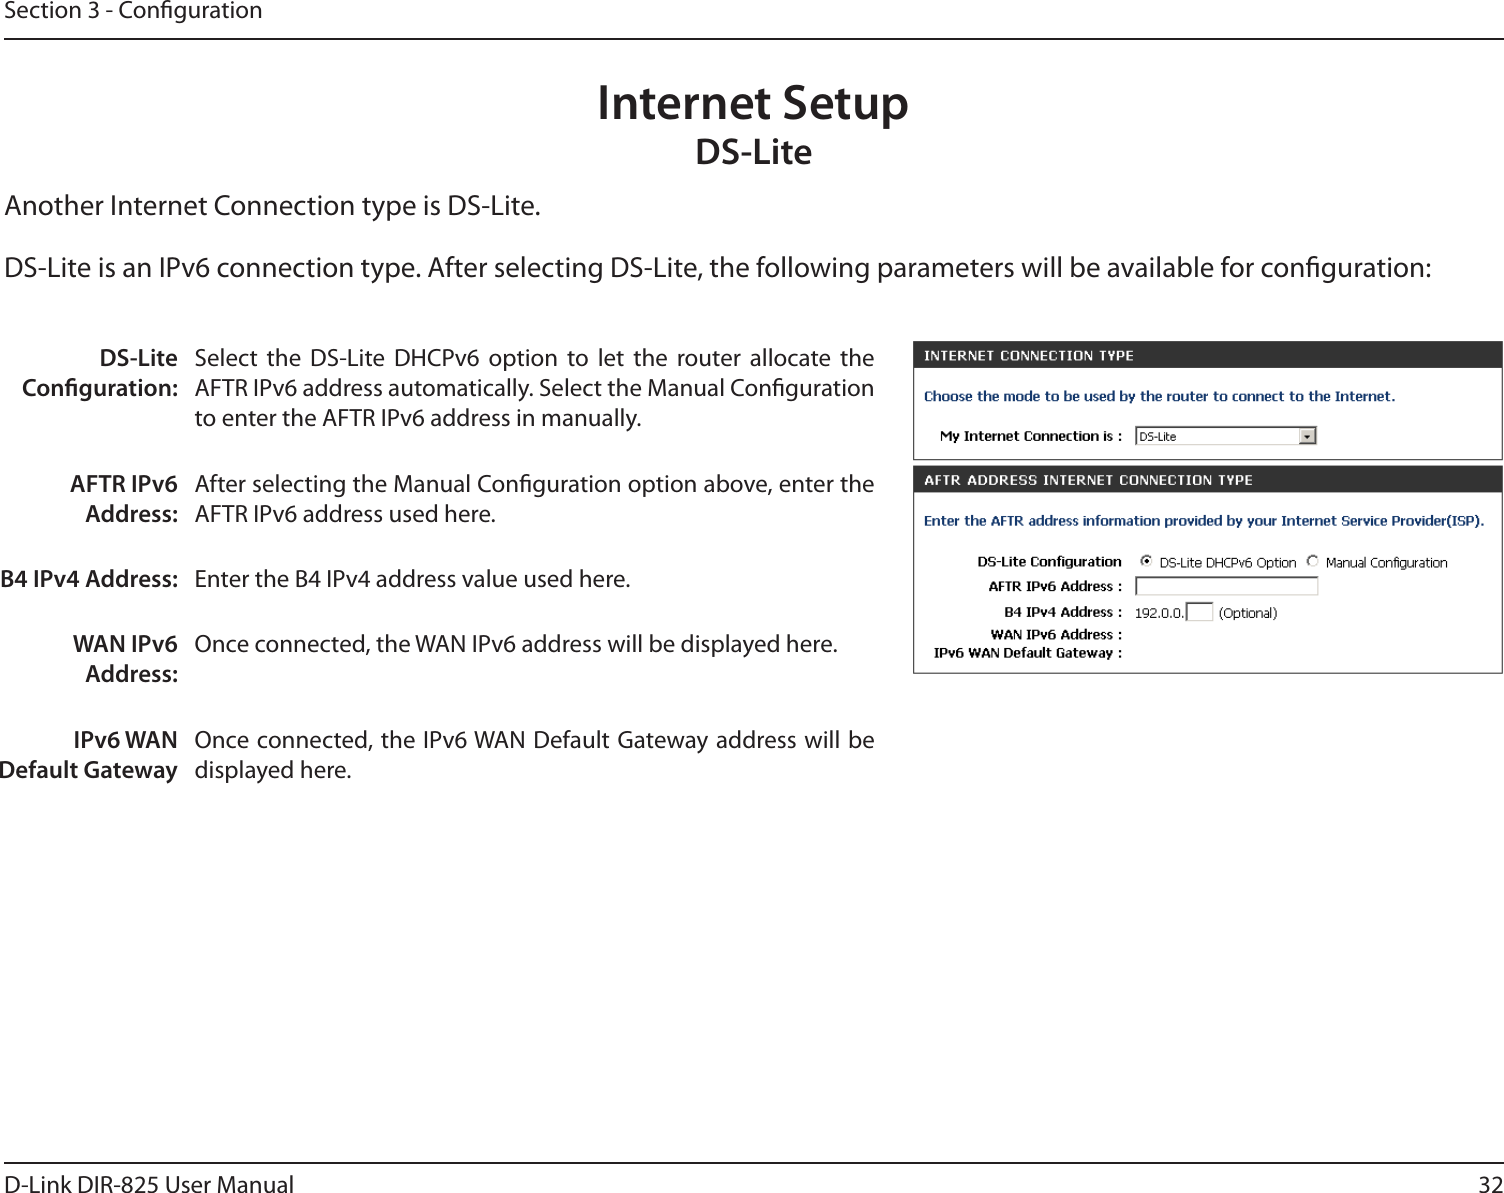 32D-Link DIR-825 User ManualSection 3 - CongurationInternet SetupDS-LiteAnother Internet Connection type is DS-Lite.DS-Lite Conguration:Select  the  DS-Lite  DHCPv6  option  to  let  the  router  allocate  the AFTR IPv6 address automatically. Select the Manual Conguration to enter the AFTR IPv6 address in manually.AFTR IPv6 Address:After selecting the Manual Conguration option above, enter the AFTR IPv6 address used here.B4 IPv4 Address: Enter the B4 IPv4 address value used here.WAN IPv6 Address:Once connected, the WAN IPv6 address will be displayed here.IPv6 WAN Default GatewayOnce connected, the IPv6 WAN Default Gateway address will be displayed here.DS-Lite is an IPv6 connection type. After selecting DS-Lite, the following parameters will be available for conguration: